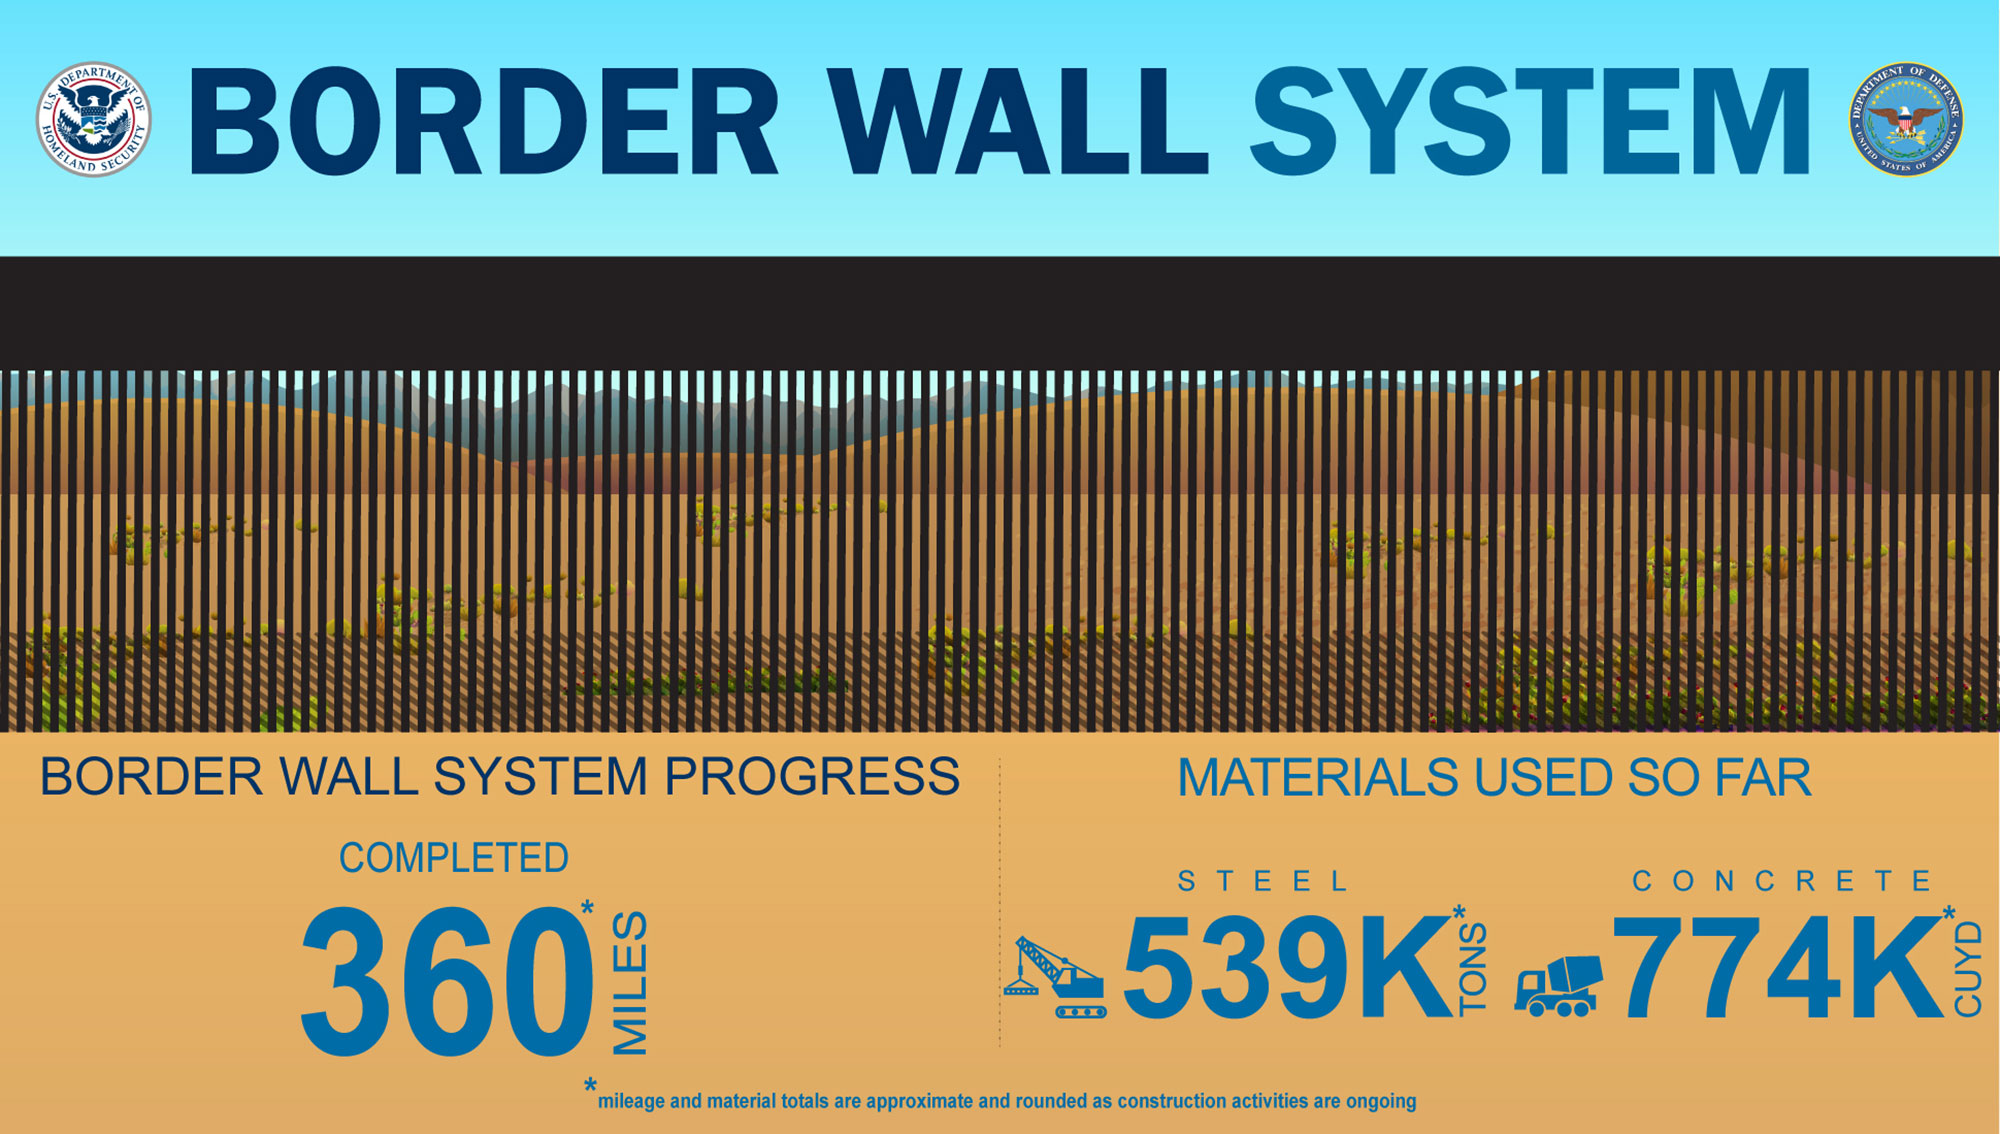 Infographic showing border wall statistics: 350 miles built; 524,000 tons of steel; 752,000 cubic yards concrete